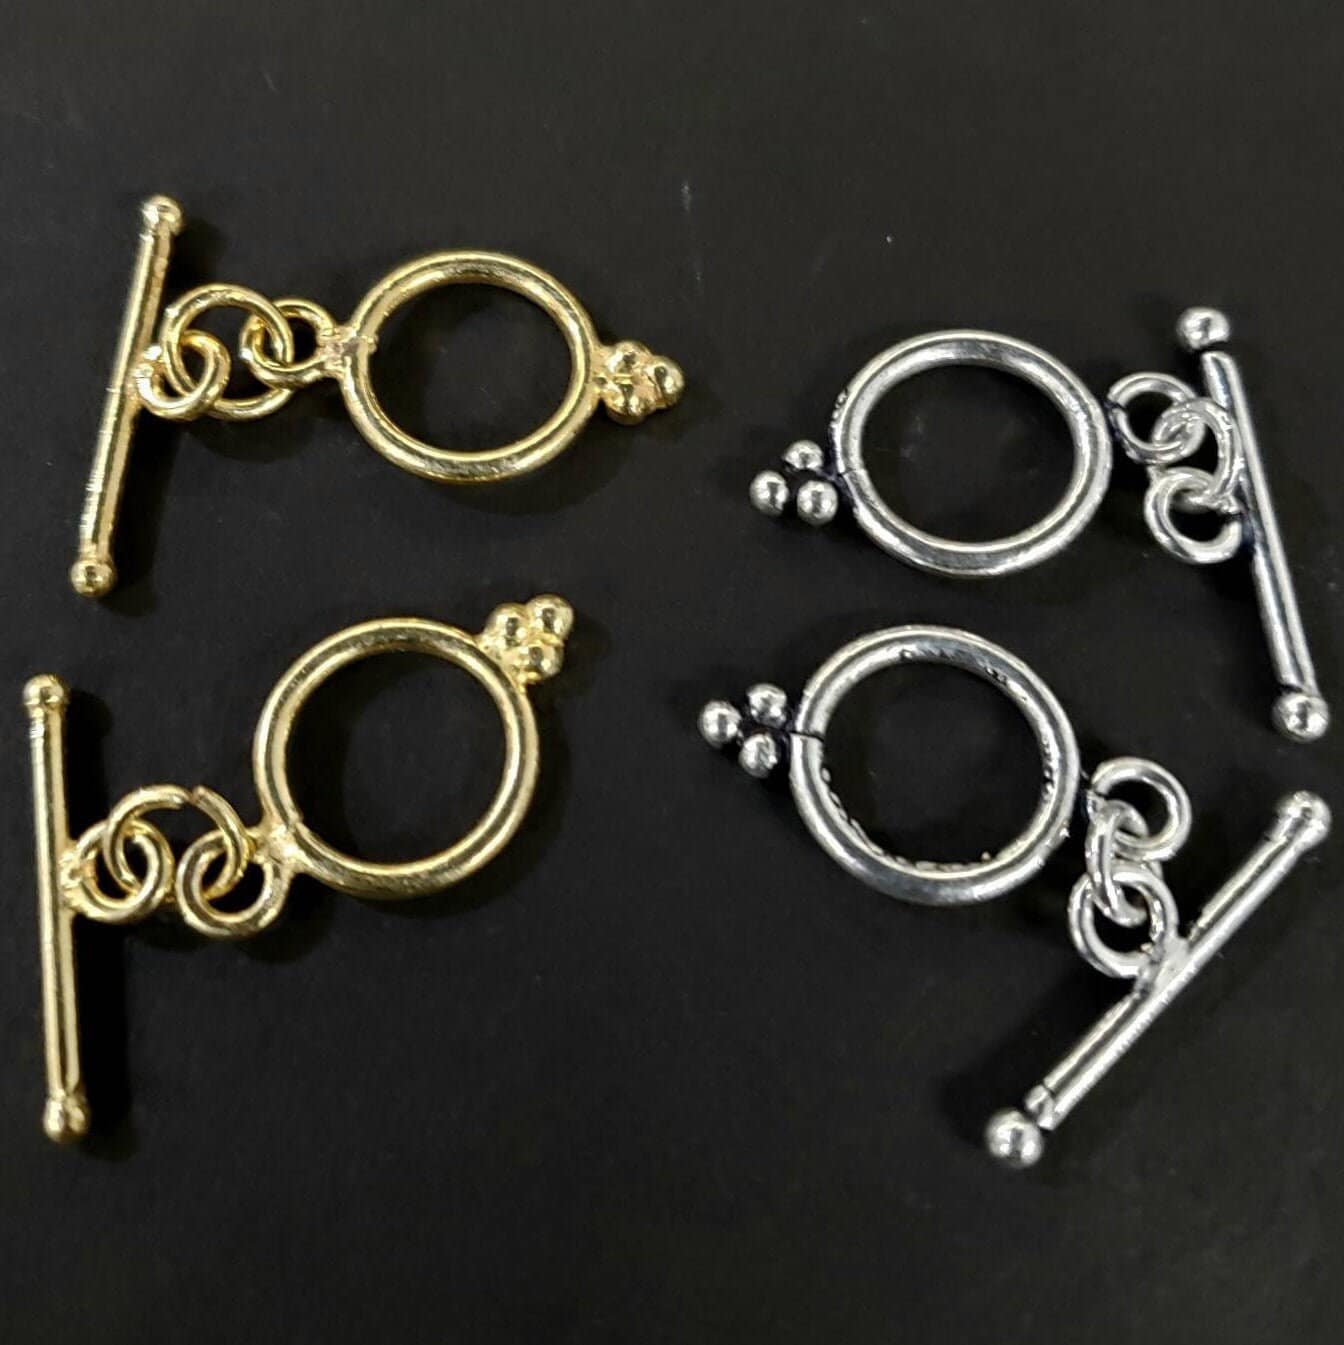 925 sterling silver and 22k gold vermeil bali toggle clasp 12mm round jewelry making clasp. 1 set